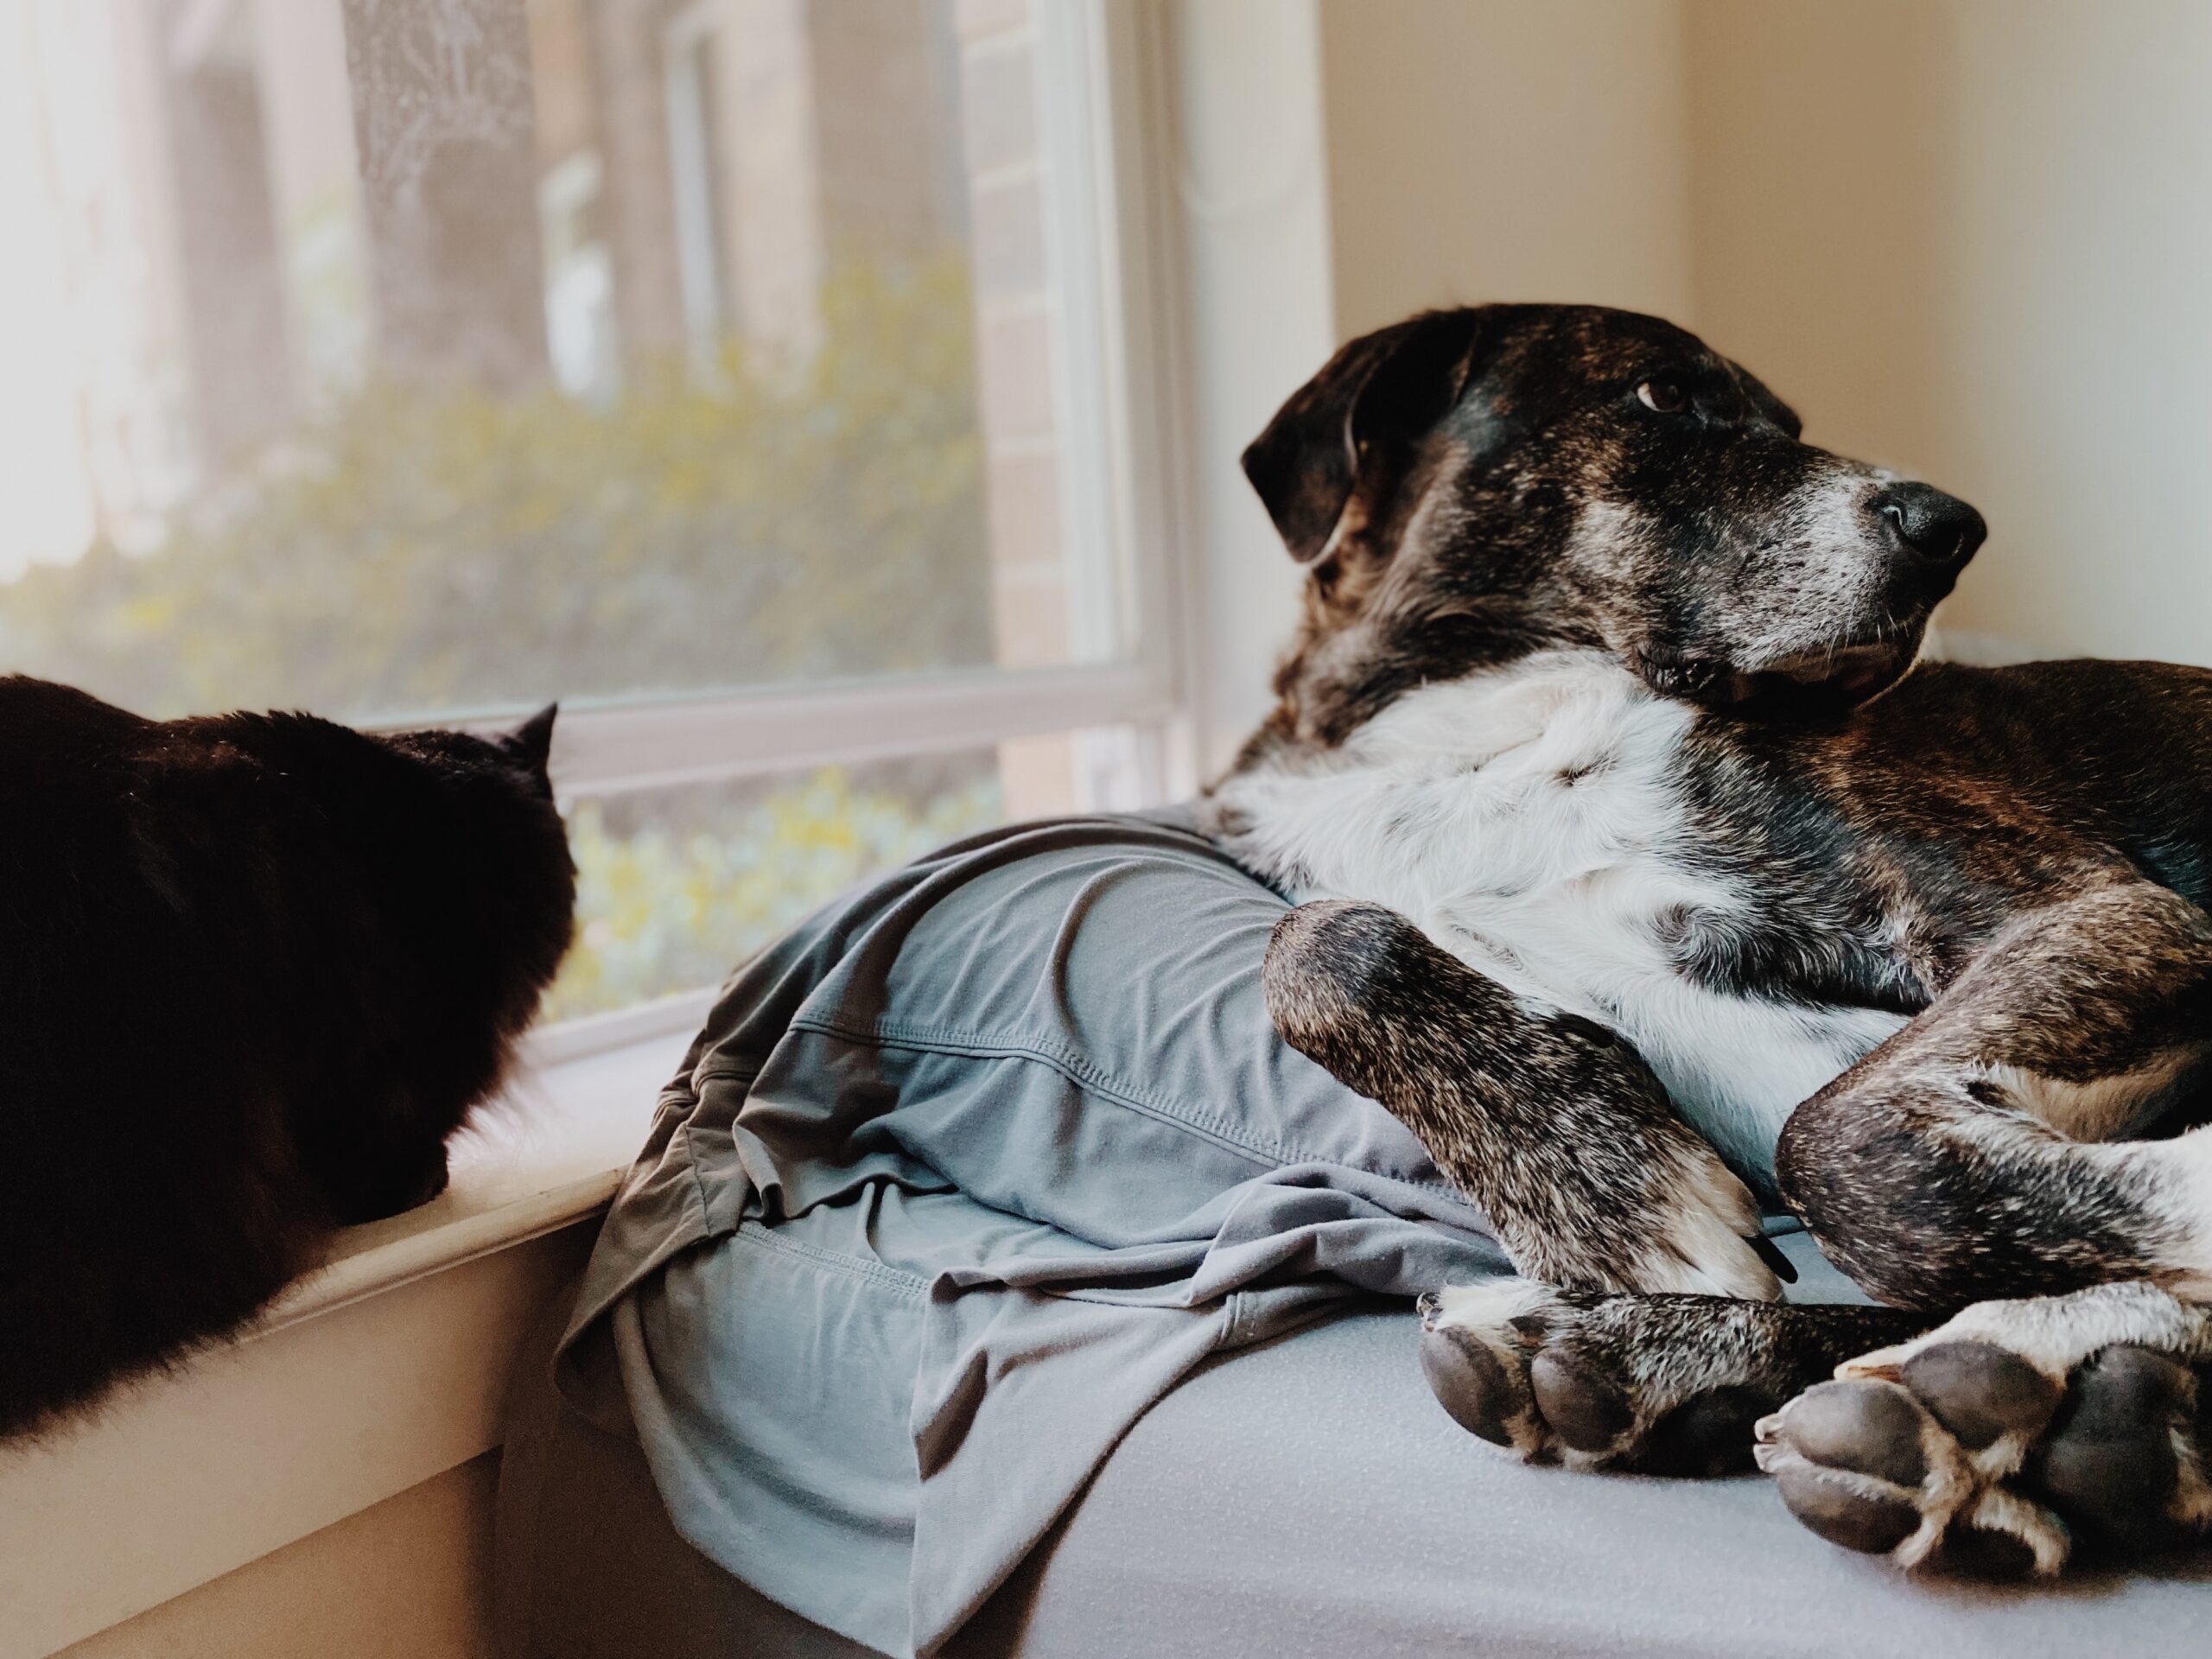 Cat and dog by the window